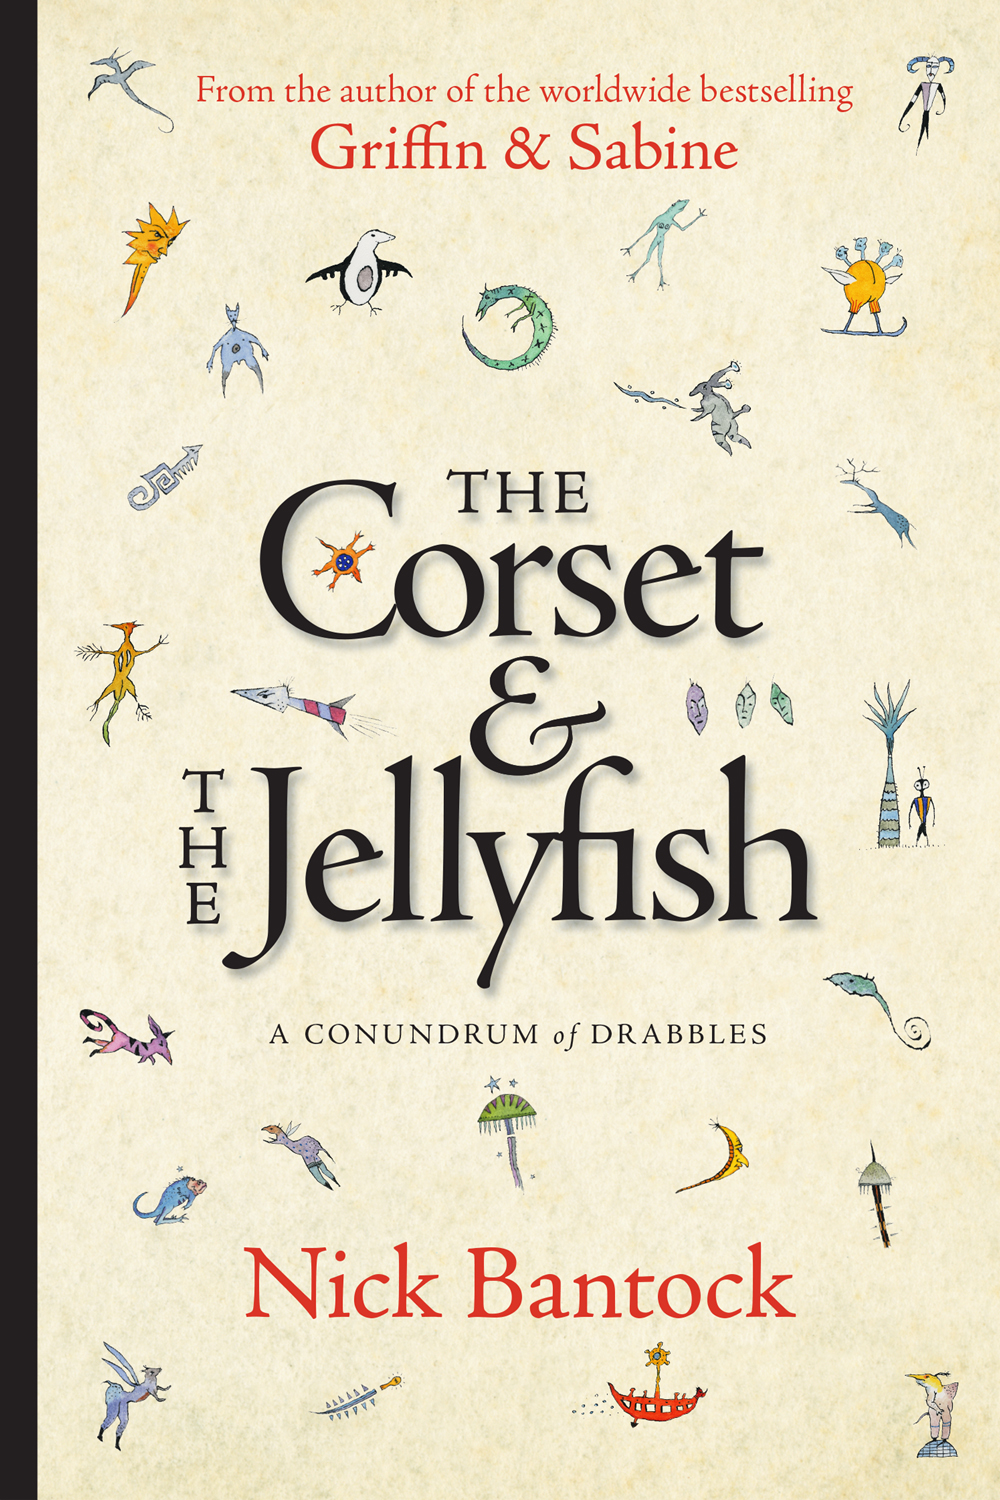 The Corset & the Jellyfish